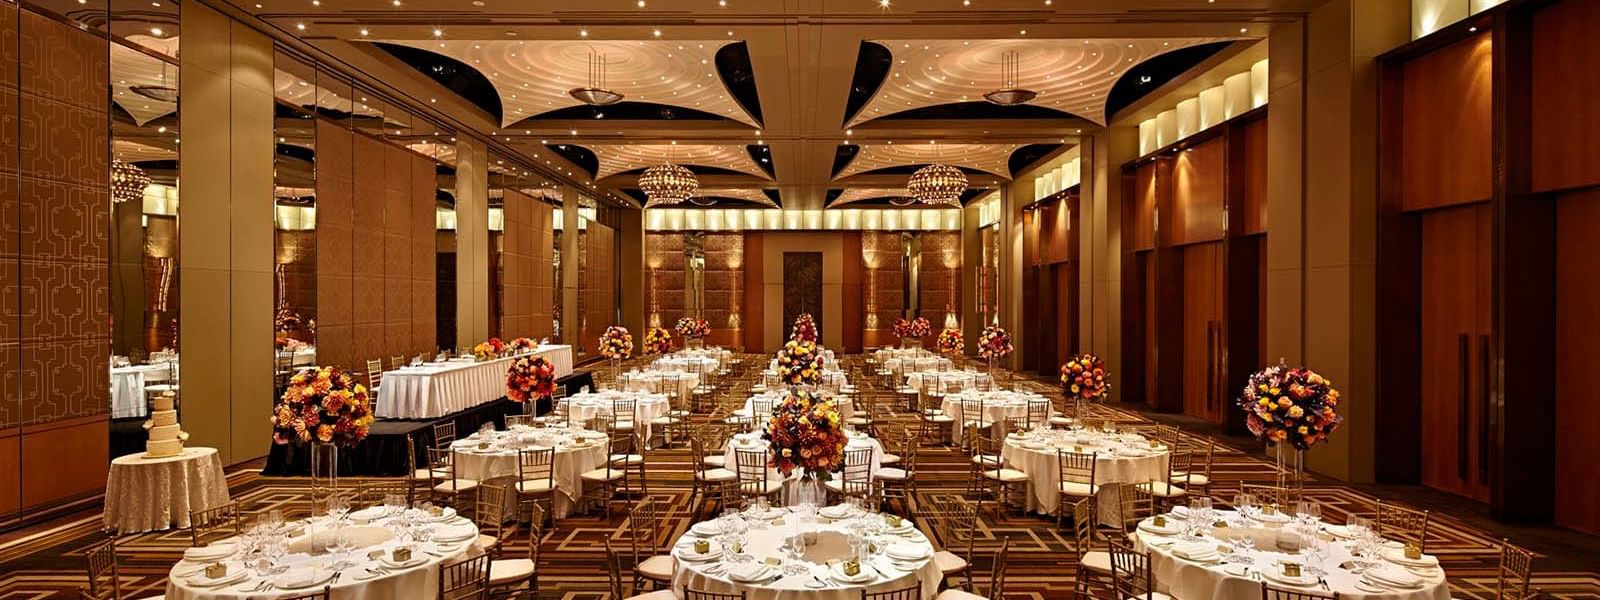 Banquet tables arranged in a hall at Crown Hotel Perth Spa